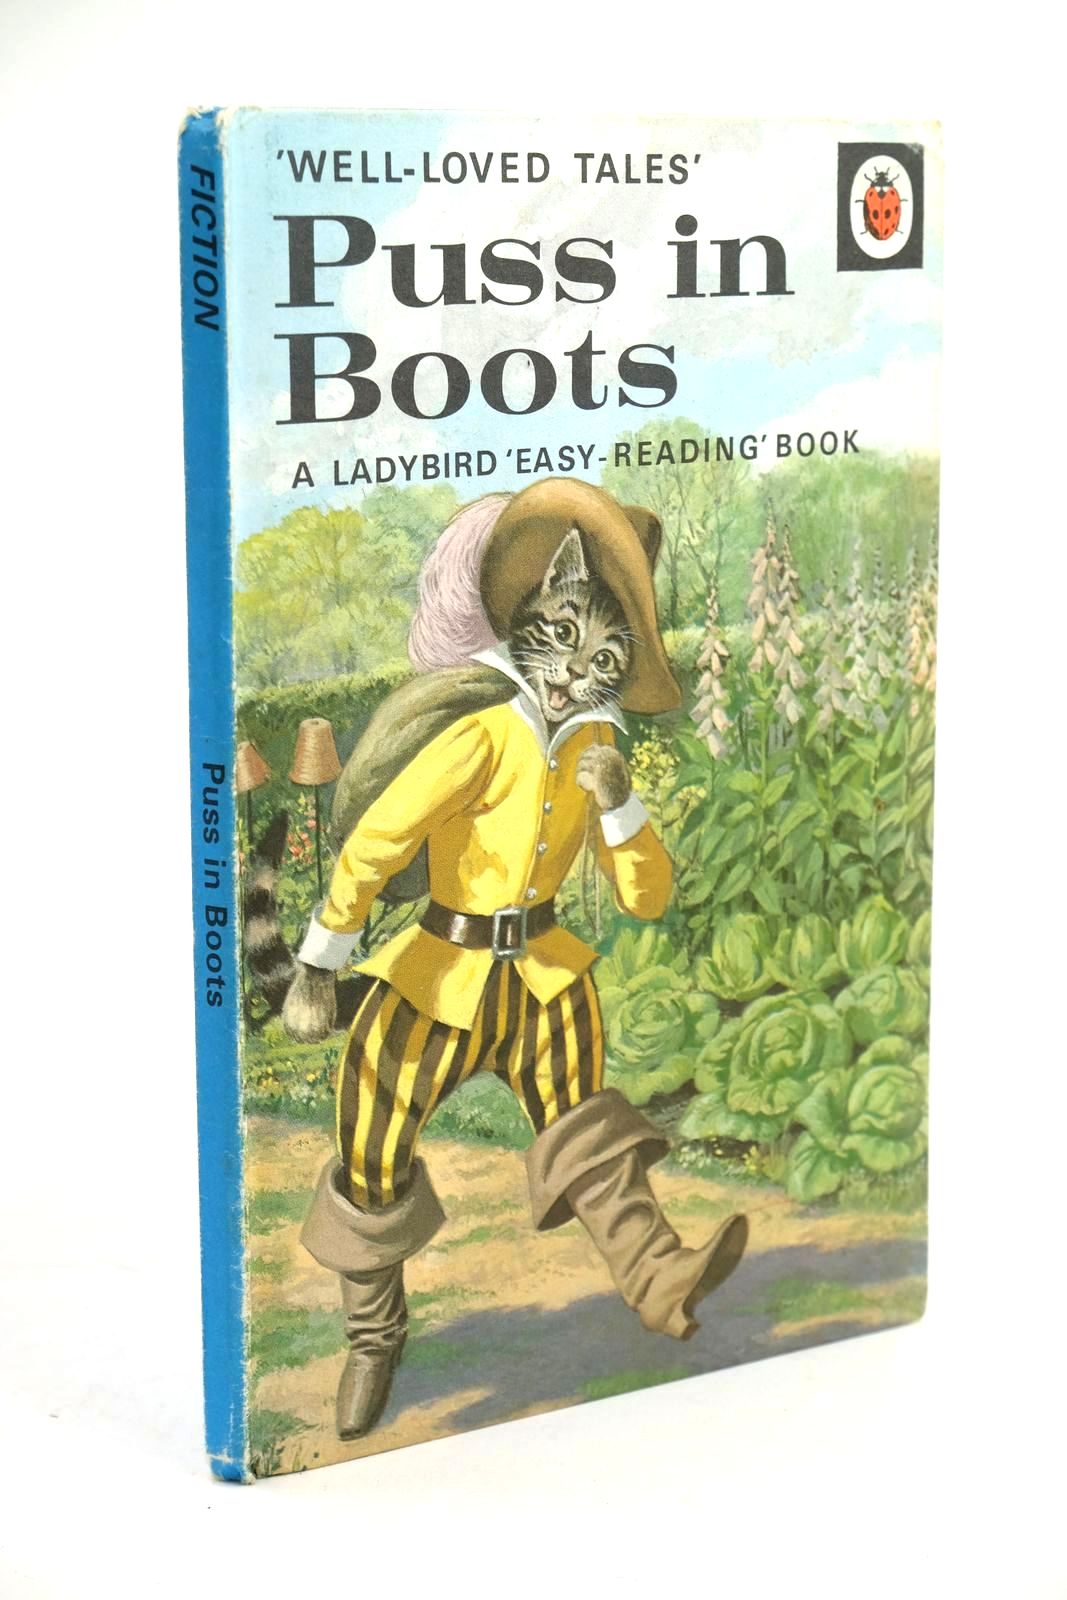 Photo of PUSS IN BOOTS written by Southgate, Vera illustrated by Winter, Eric published by Wills & Hepworth Ltd. (STOCK CODE: 1321457)  for sale by Stella & Rose's Books